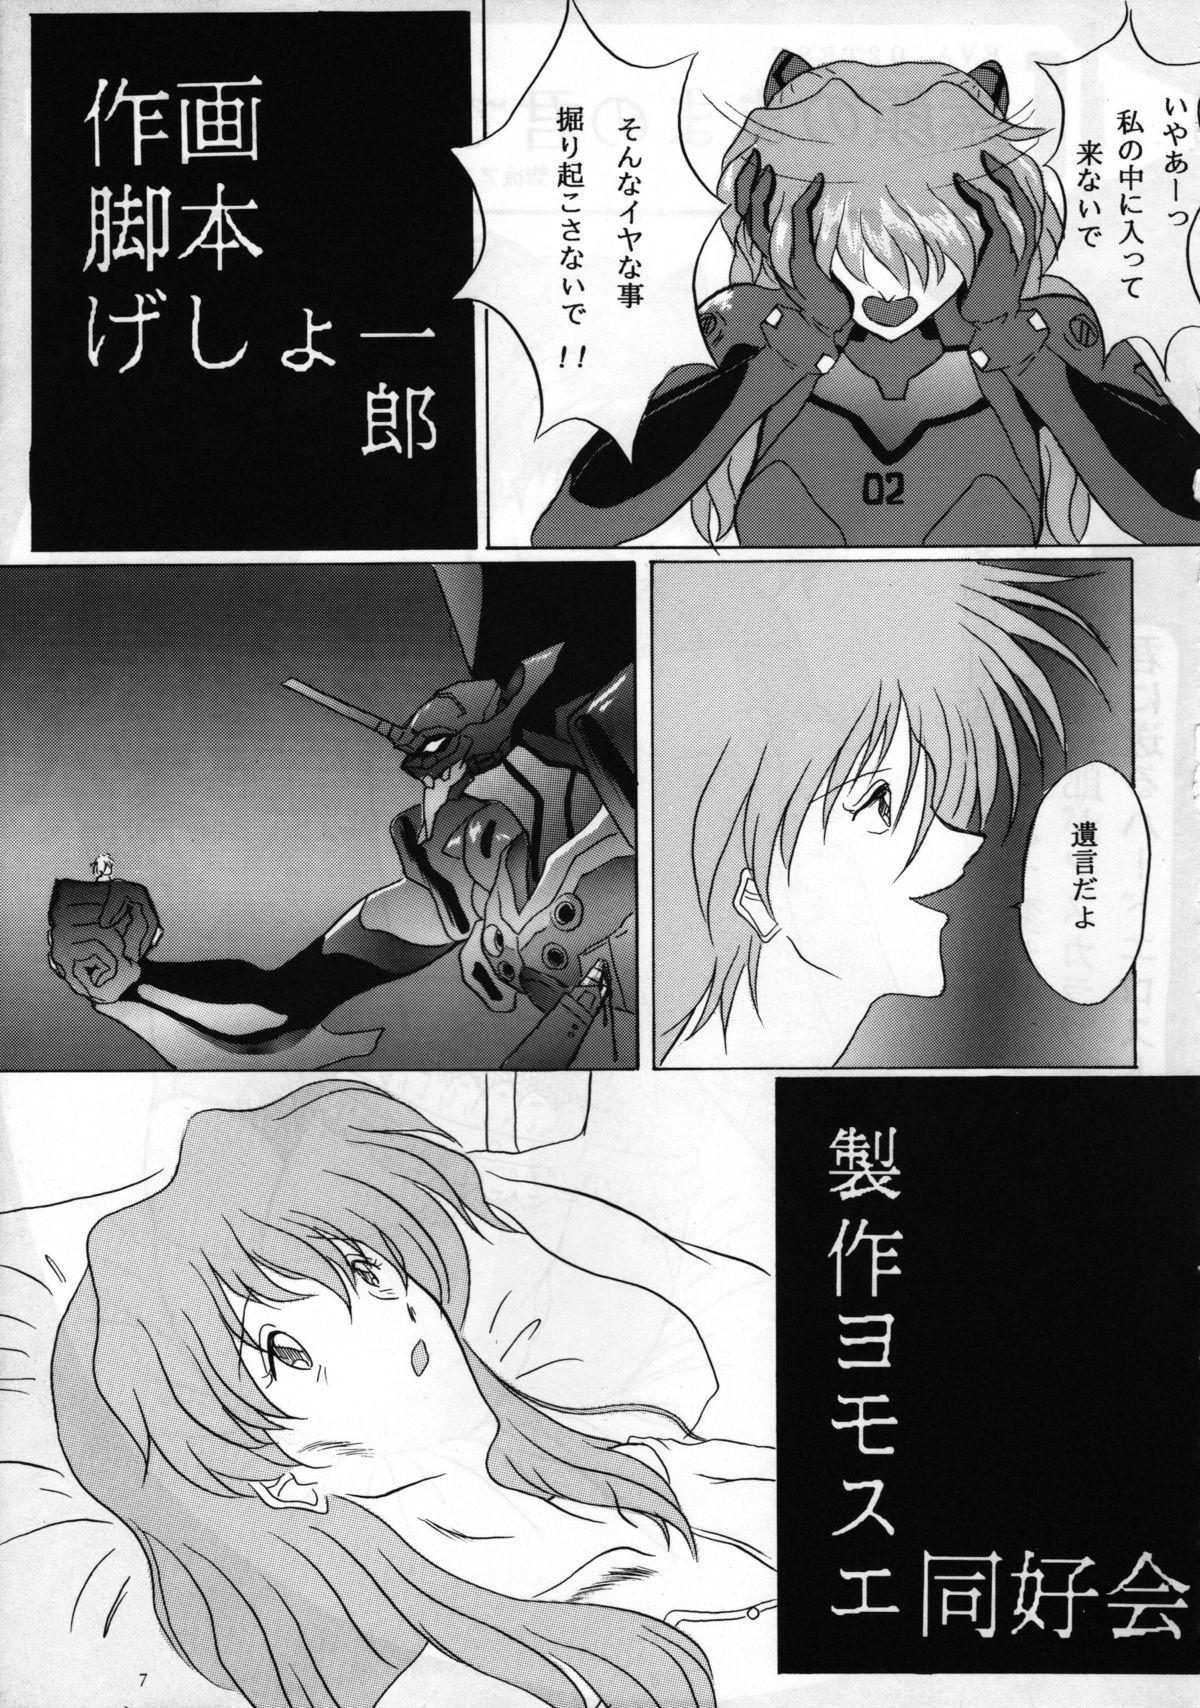 Gay Tattoos THE OMNIVOUS XI - Neon genesis evangelion Reverse Cowgirl - Page 6